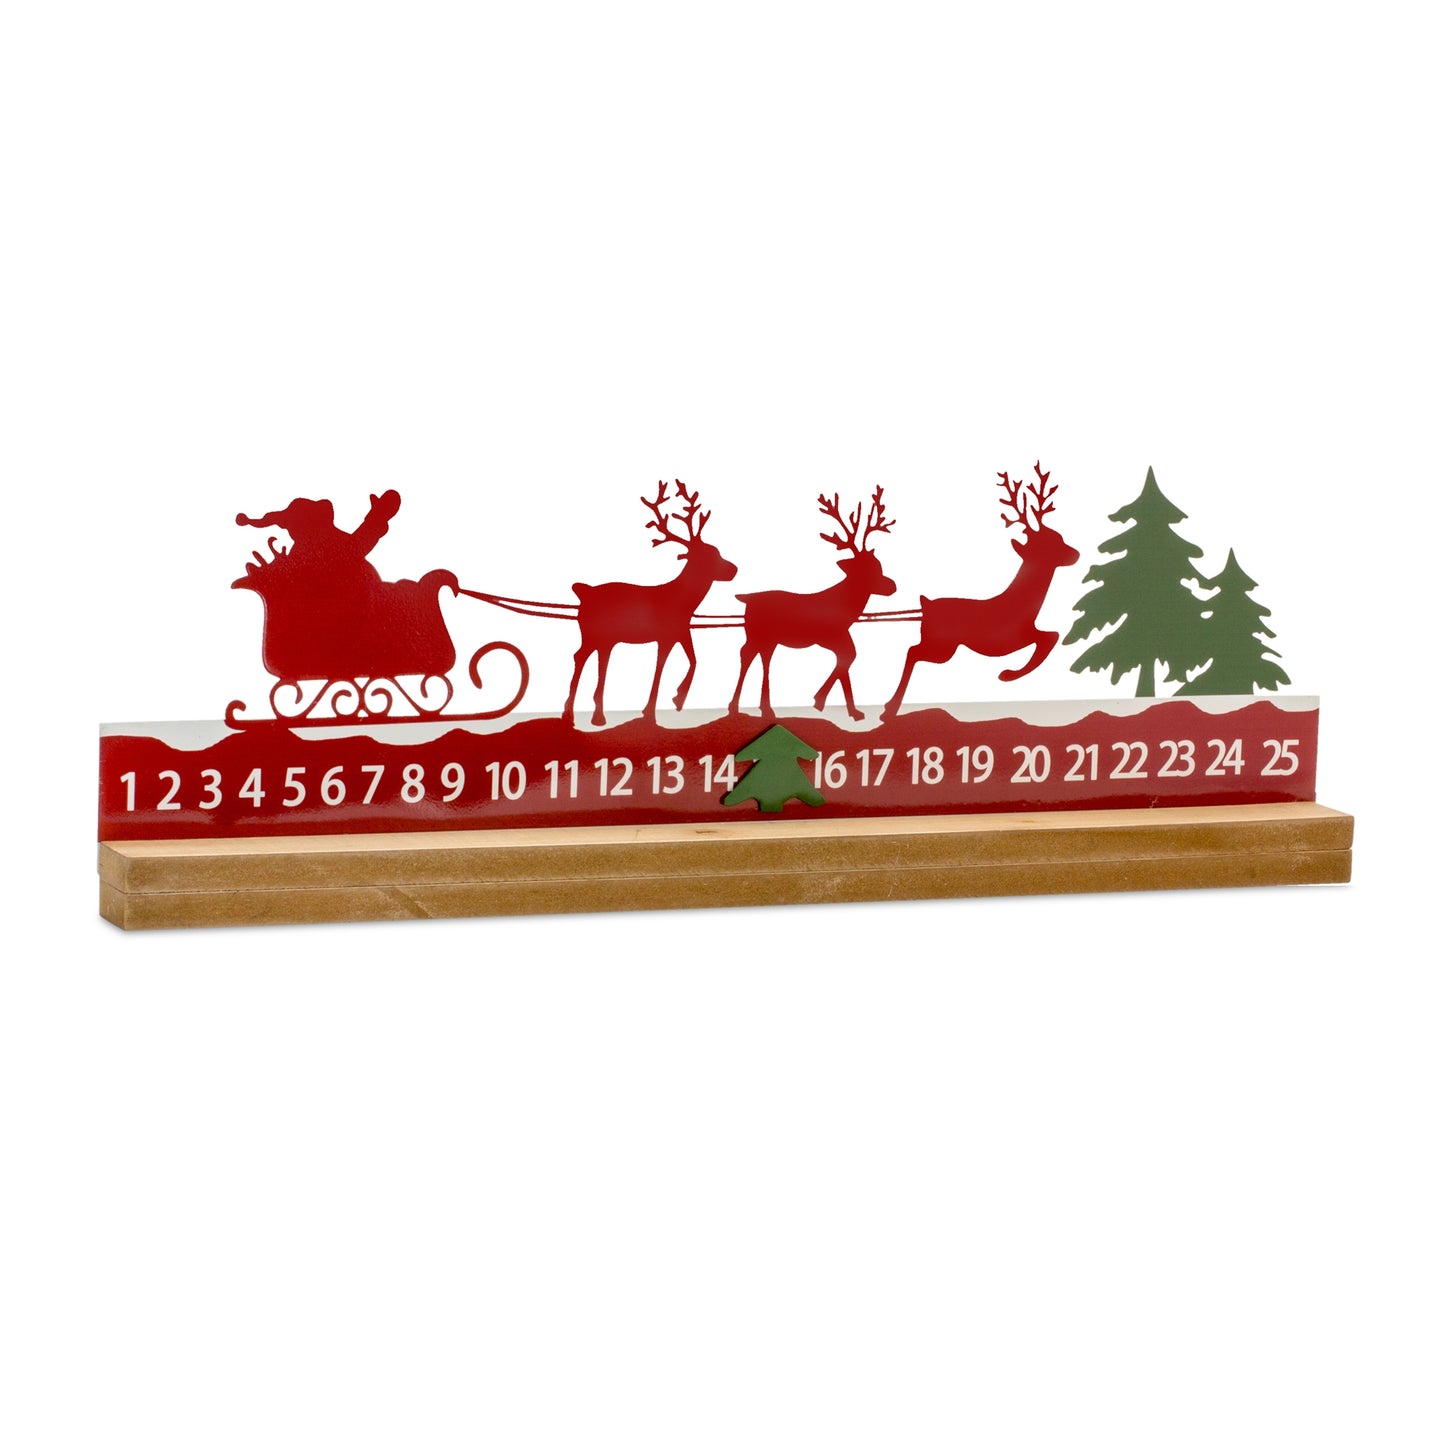 Metal Cut Out Santa and Sleigh Christmas Countdown with Fir Wood Base 23.5"L